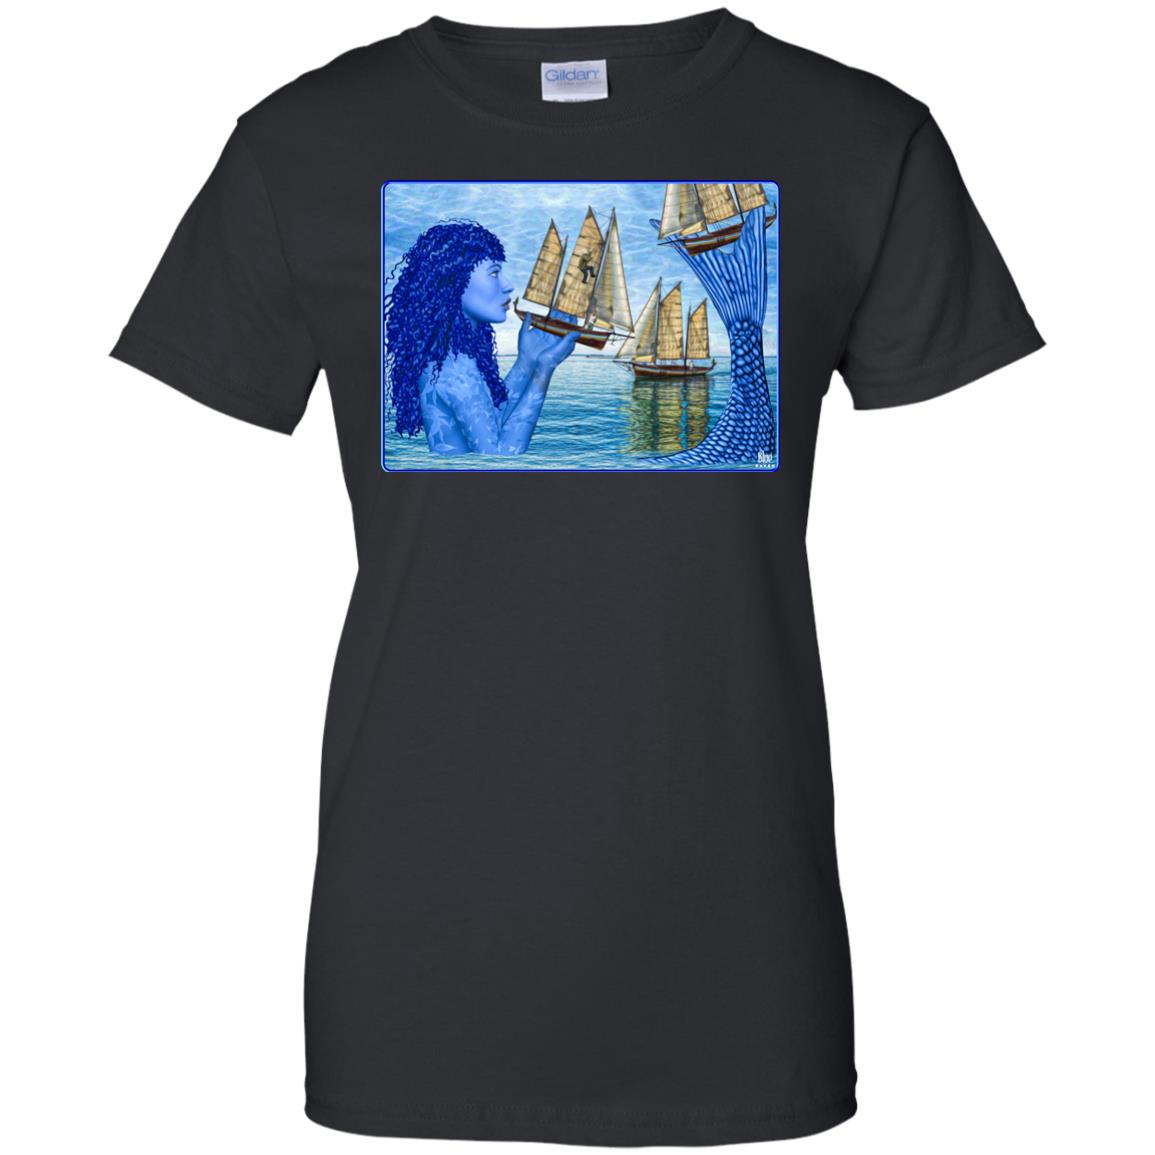 I Saw Three Ships - Women's Relaxed Fit T-Shirt